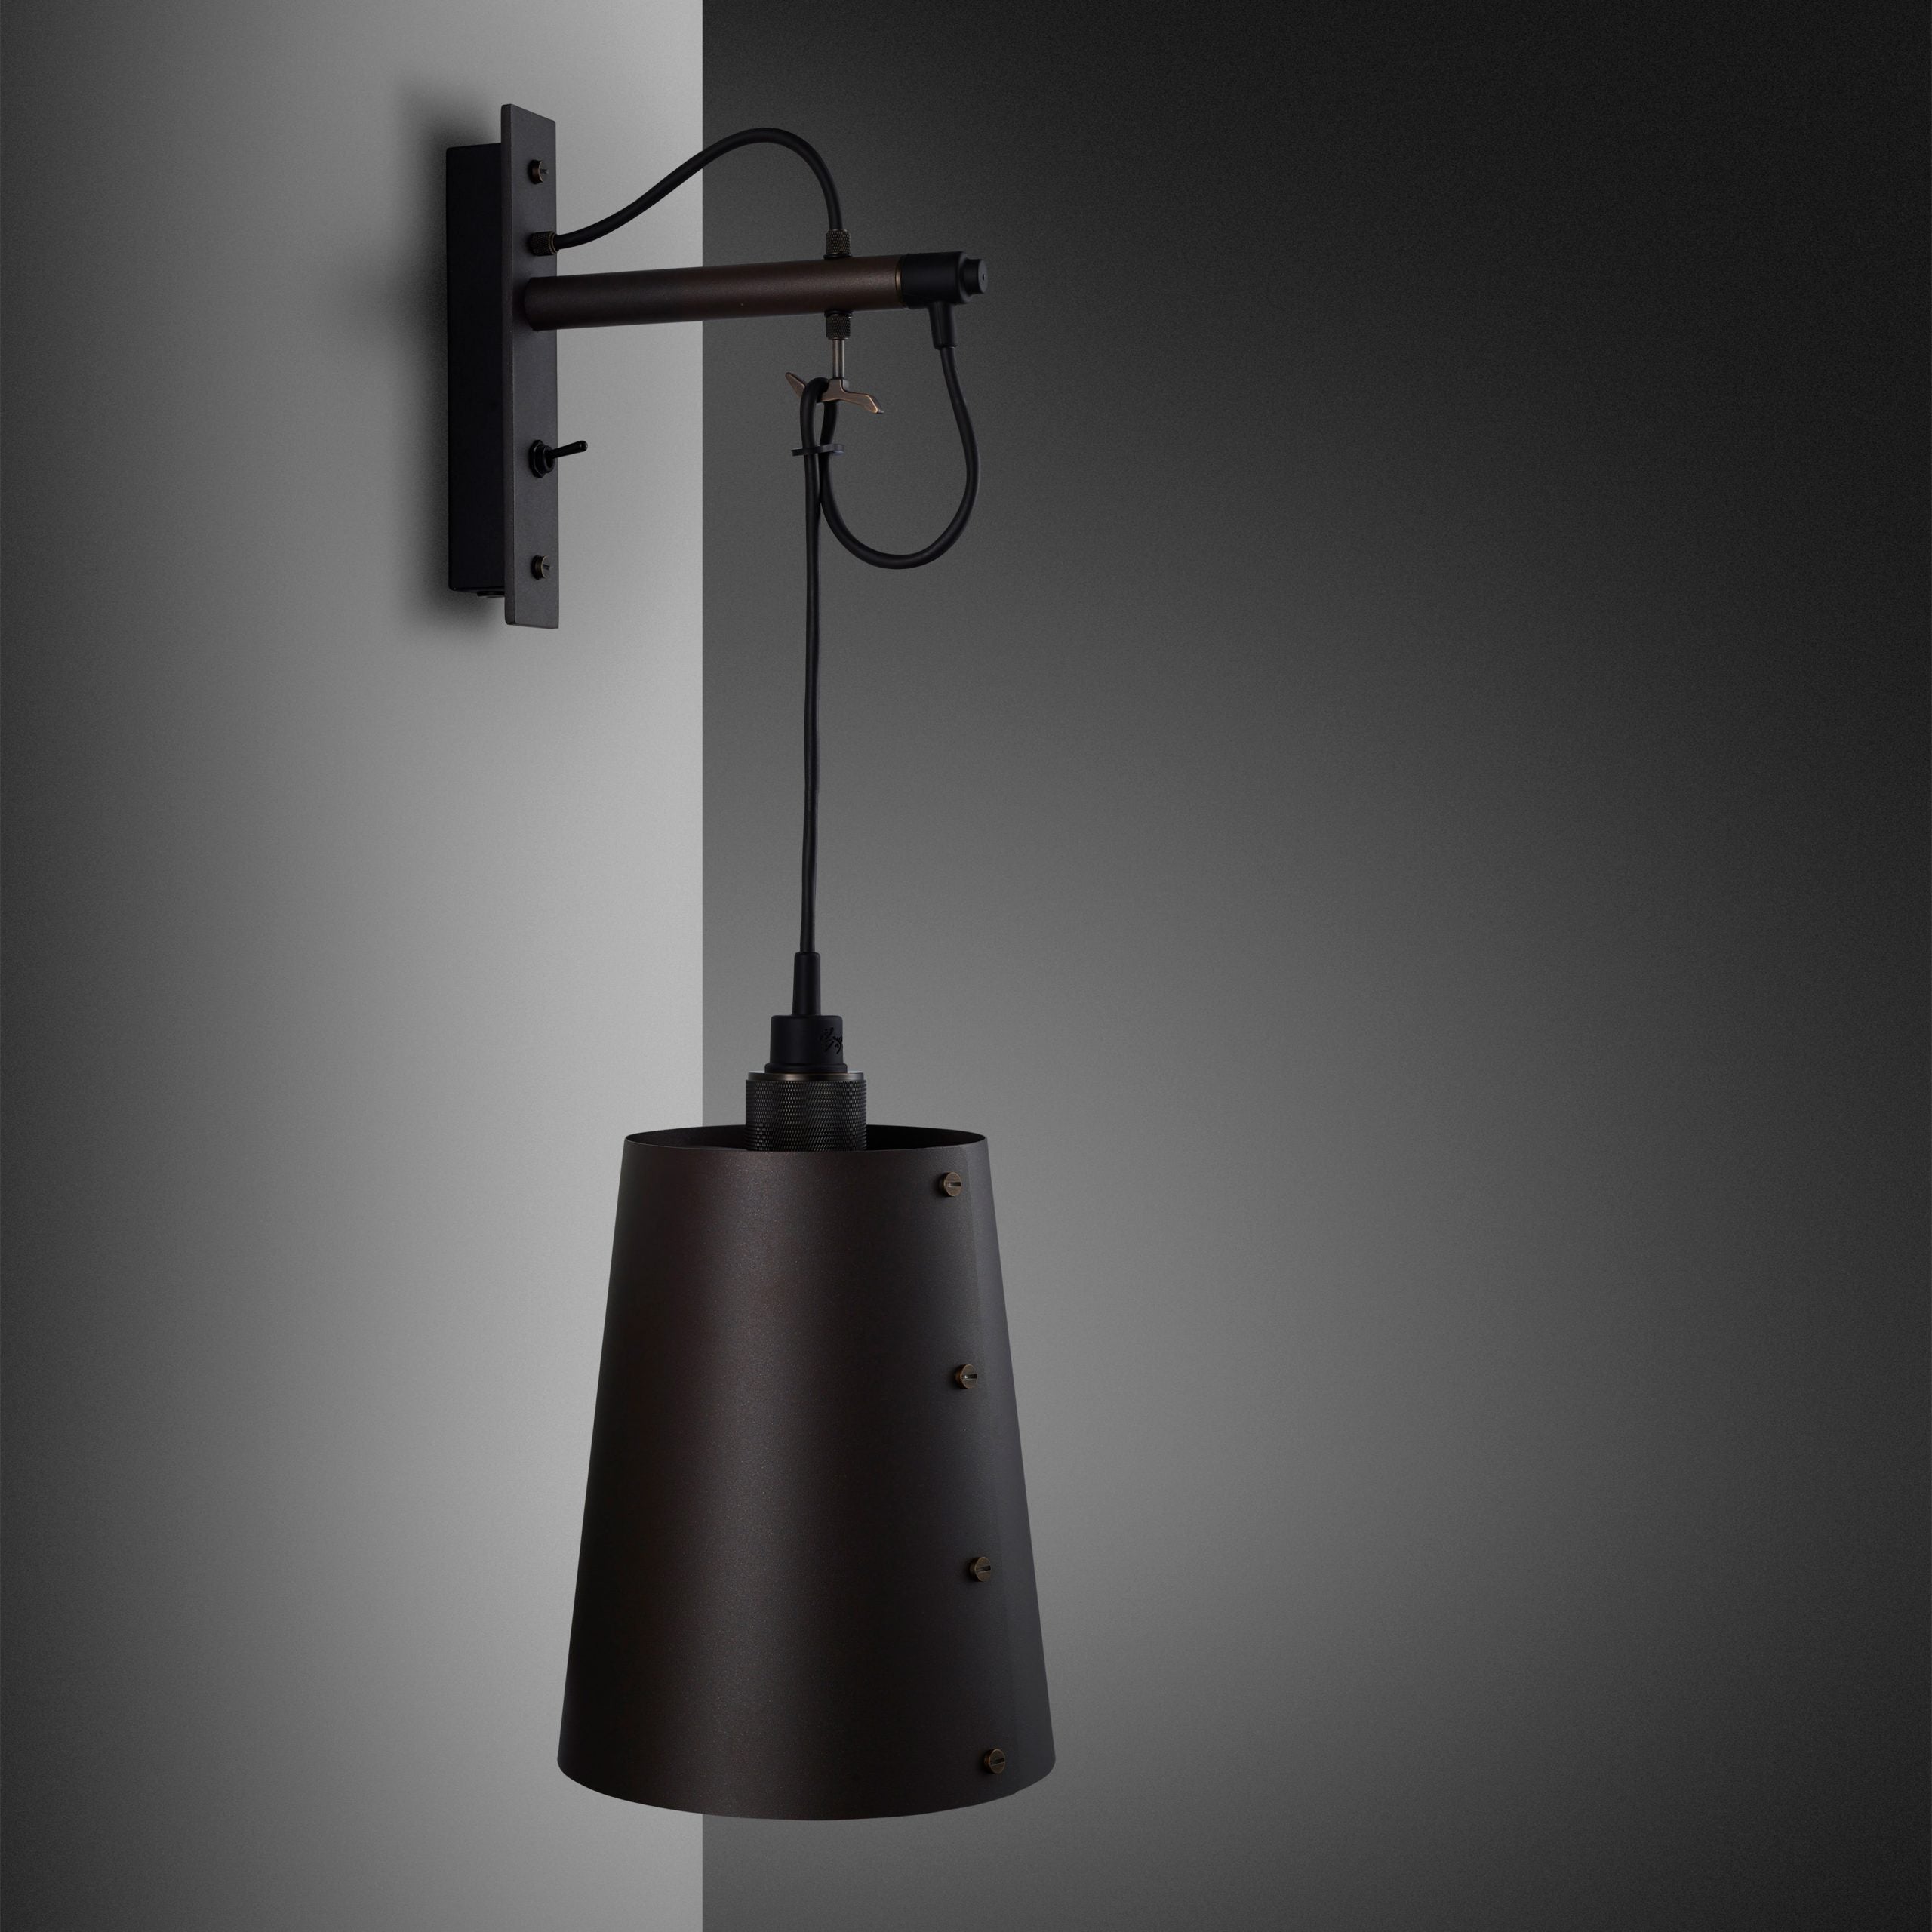 Buster + Punch Hooked Wall Sconce Wall Light Fixtures Buster + Punch Graphite/Smoked Bronze & Graphite Shade Large 